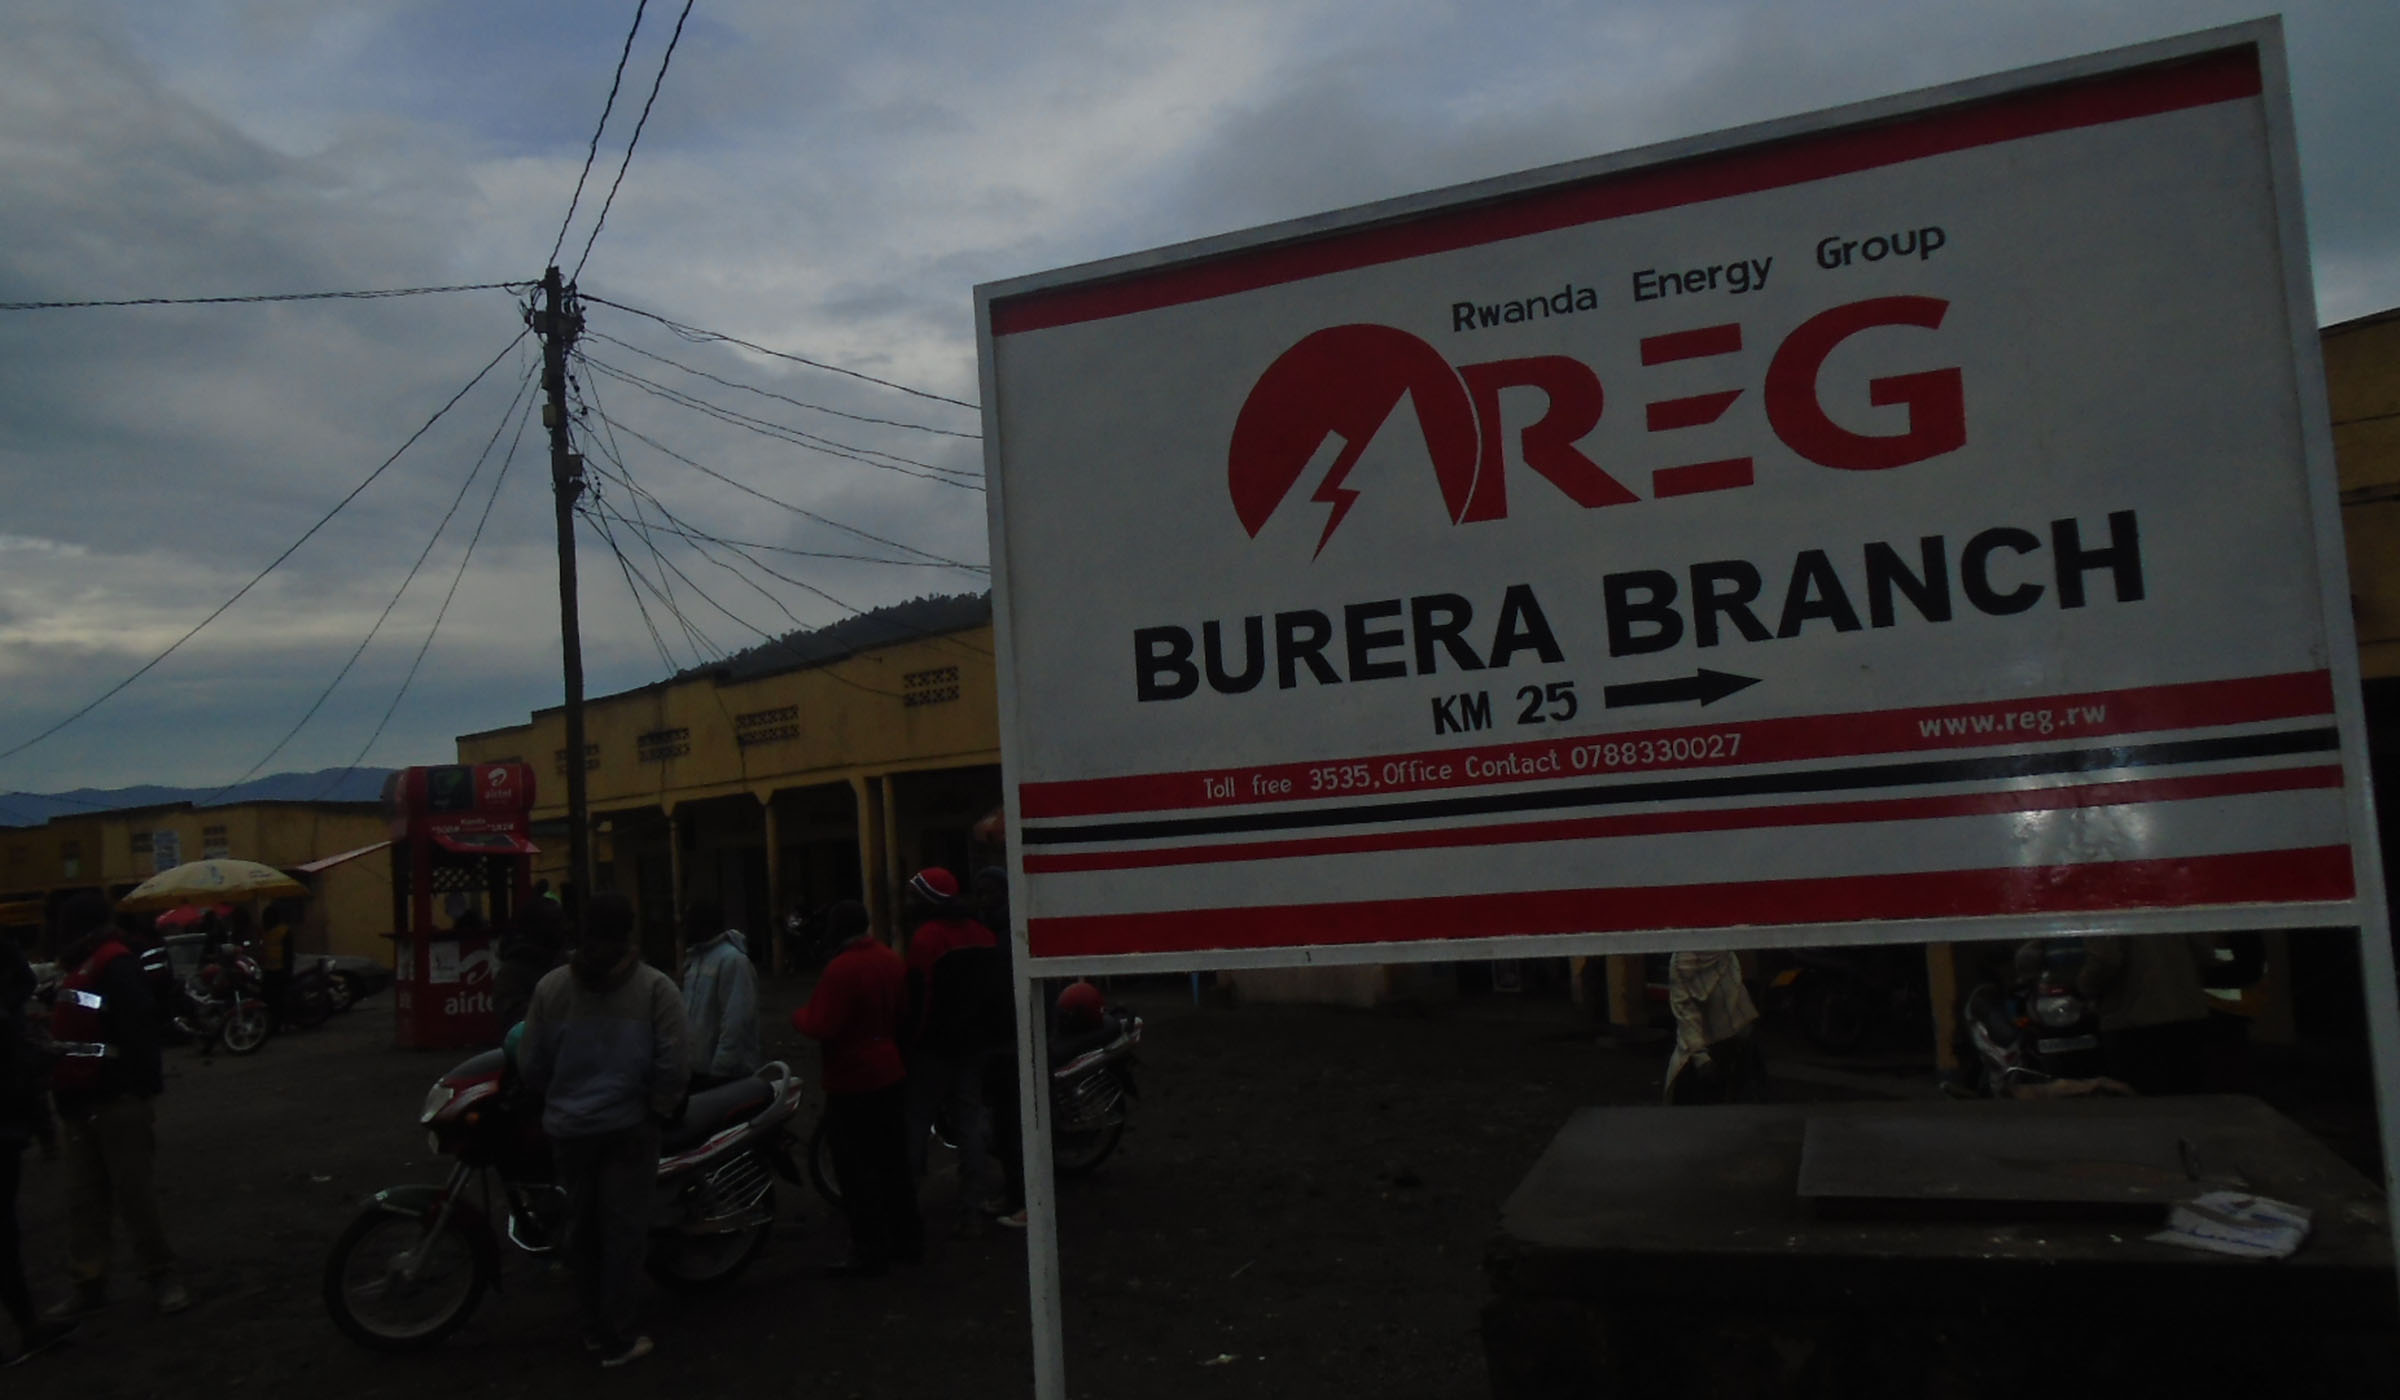 Burera residents look to electricty for transforming their lives.Michel Nkurunziza